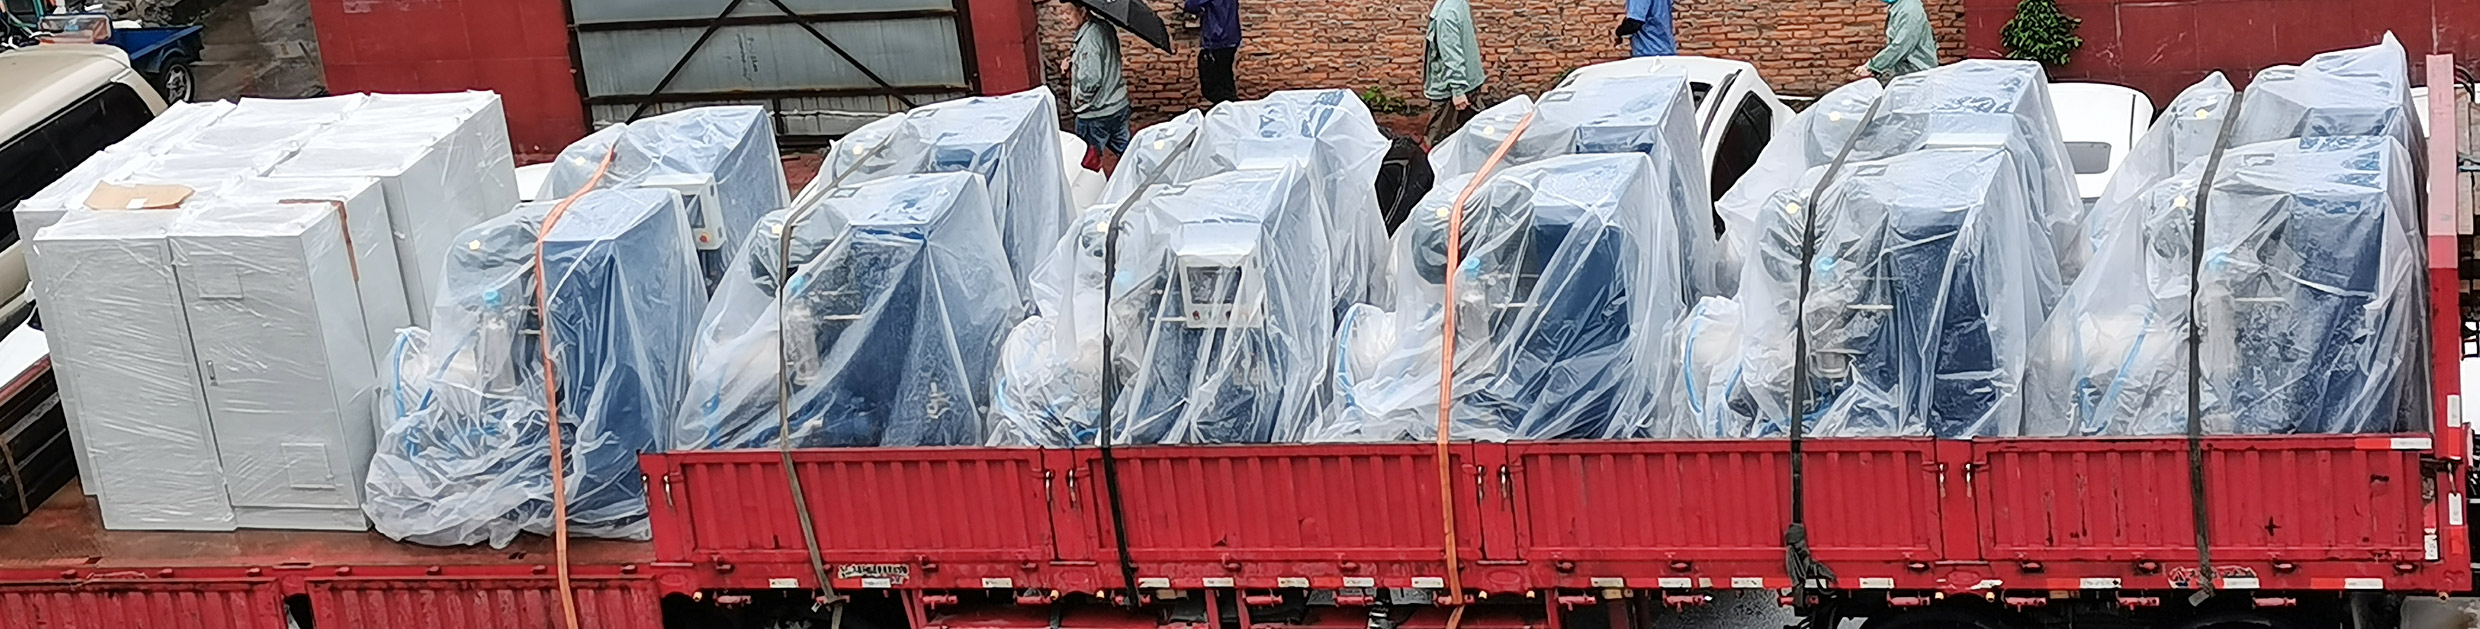 Shipment! 12 sets of Boyee Sander and 33 sets of mixing tank officially shipped, the application of disperse dye industry!